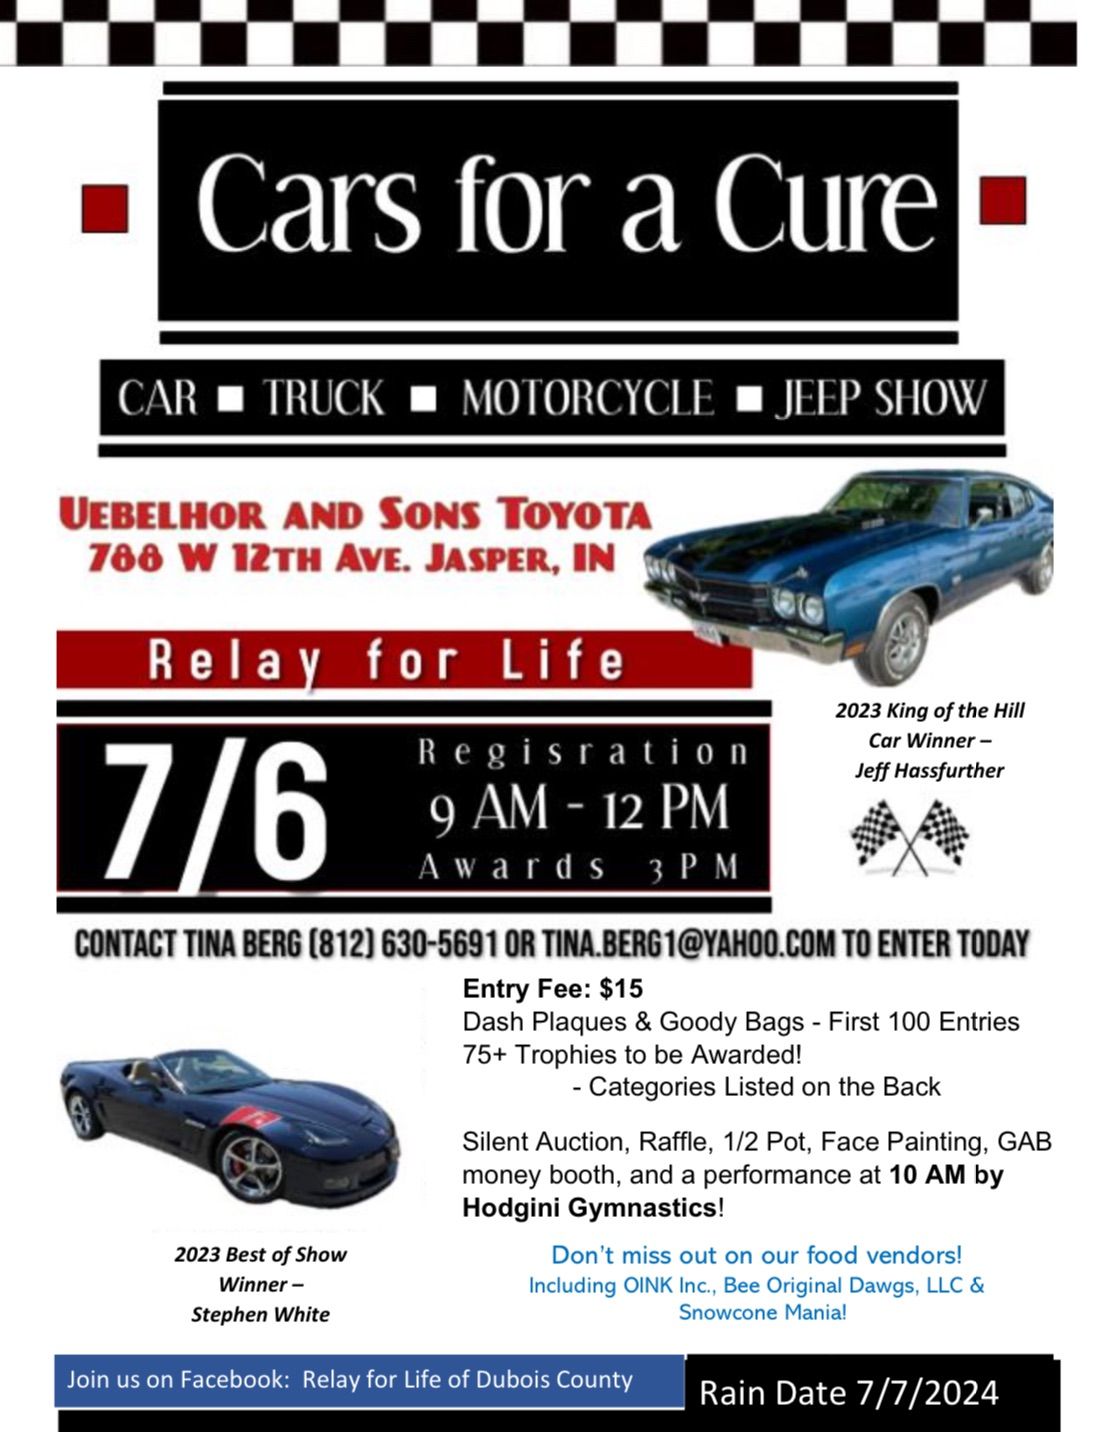 Relay for Life Cars for a Cure